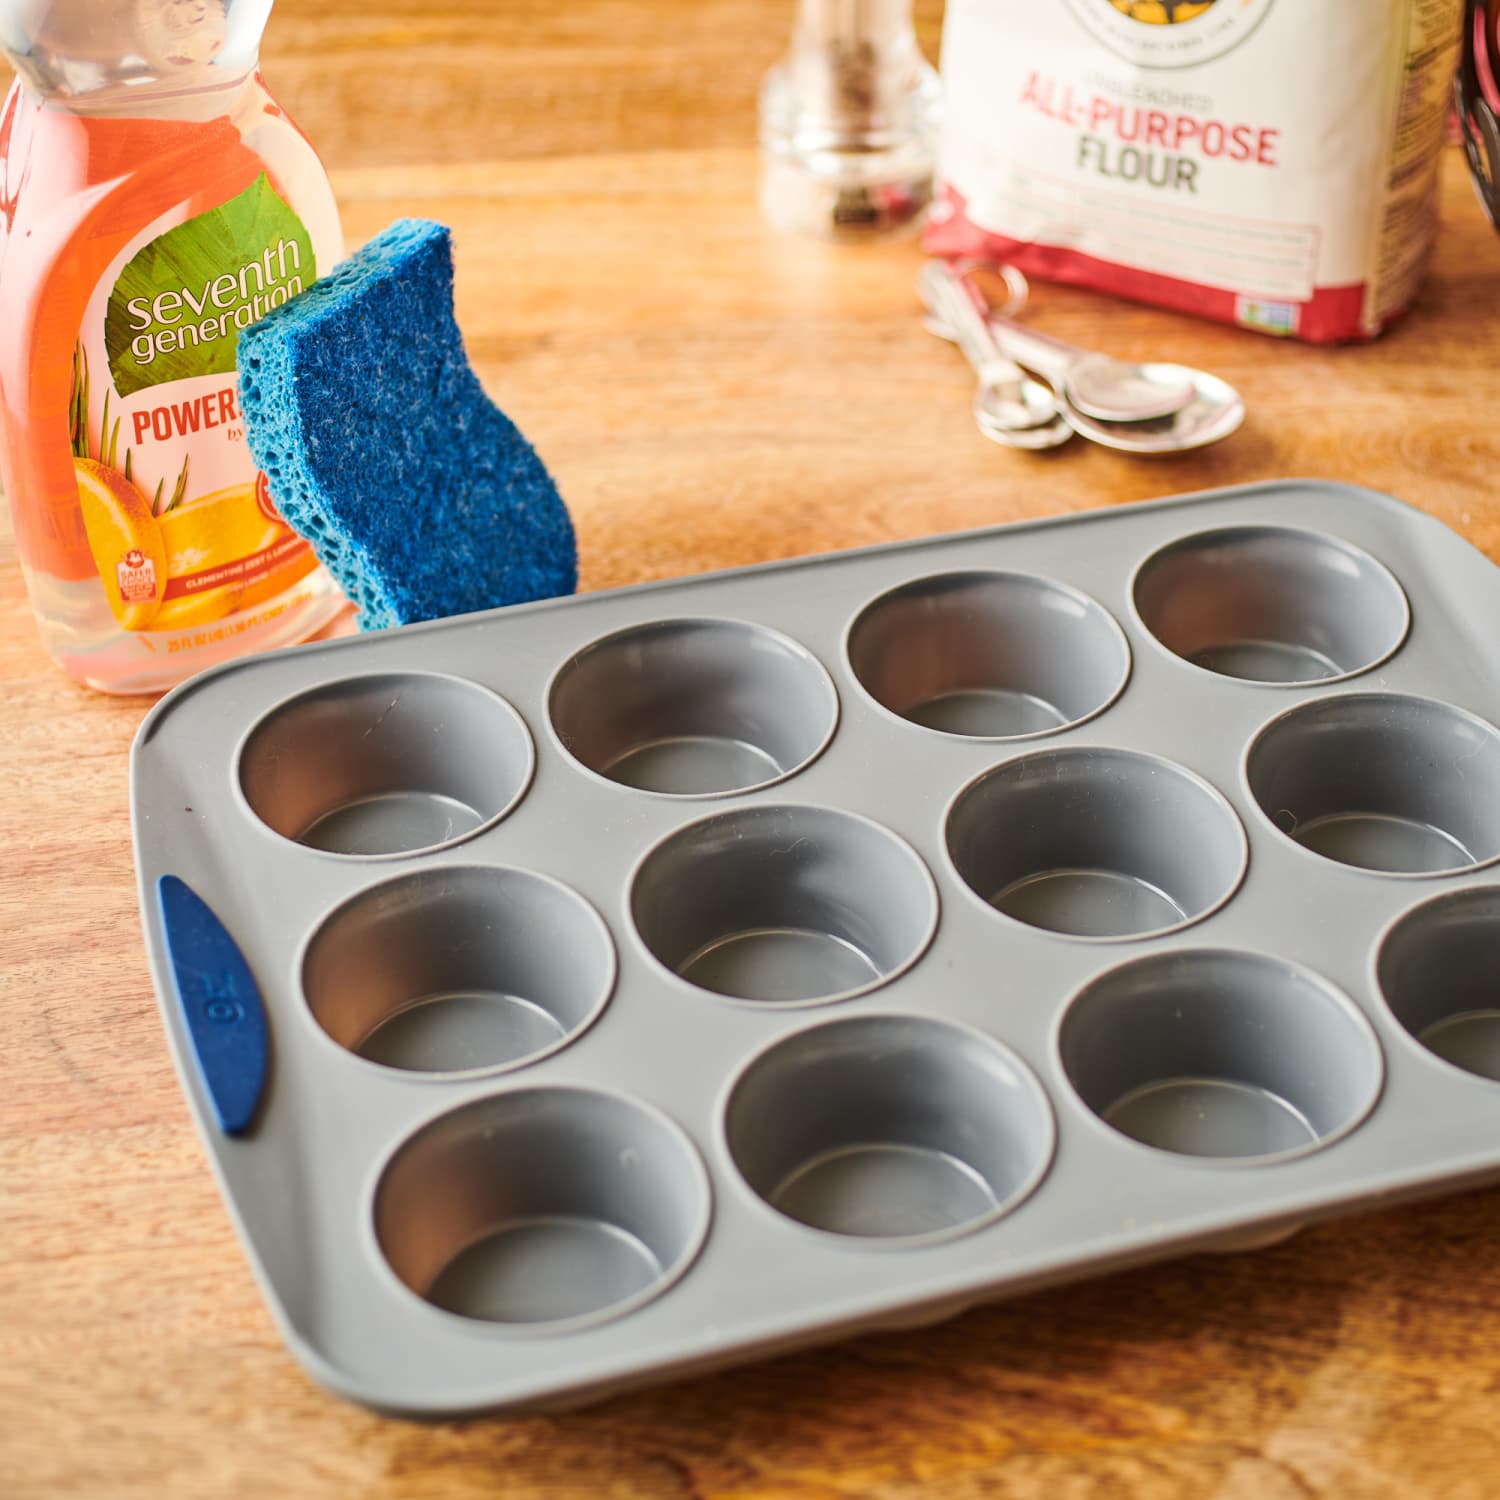 Putting it to the test: Does silicone bakeware pan out? – East Bay Times